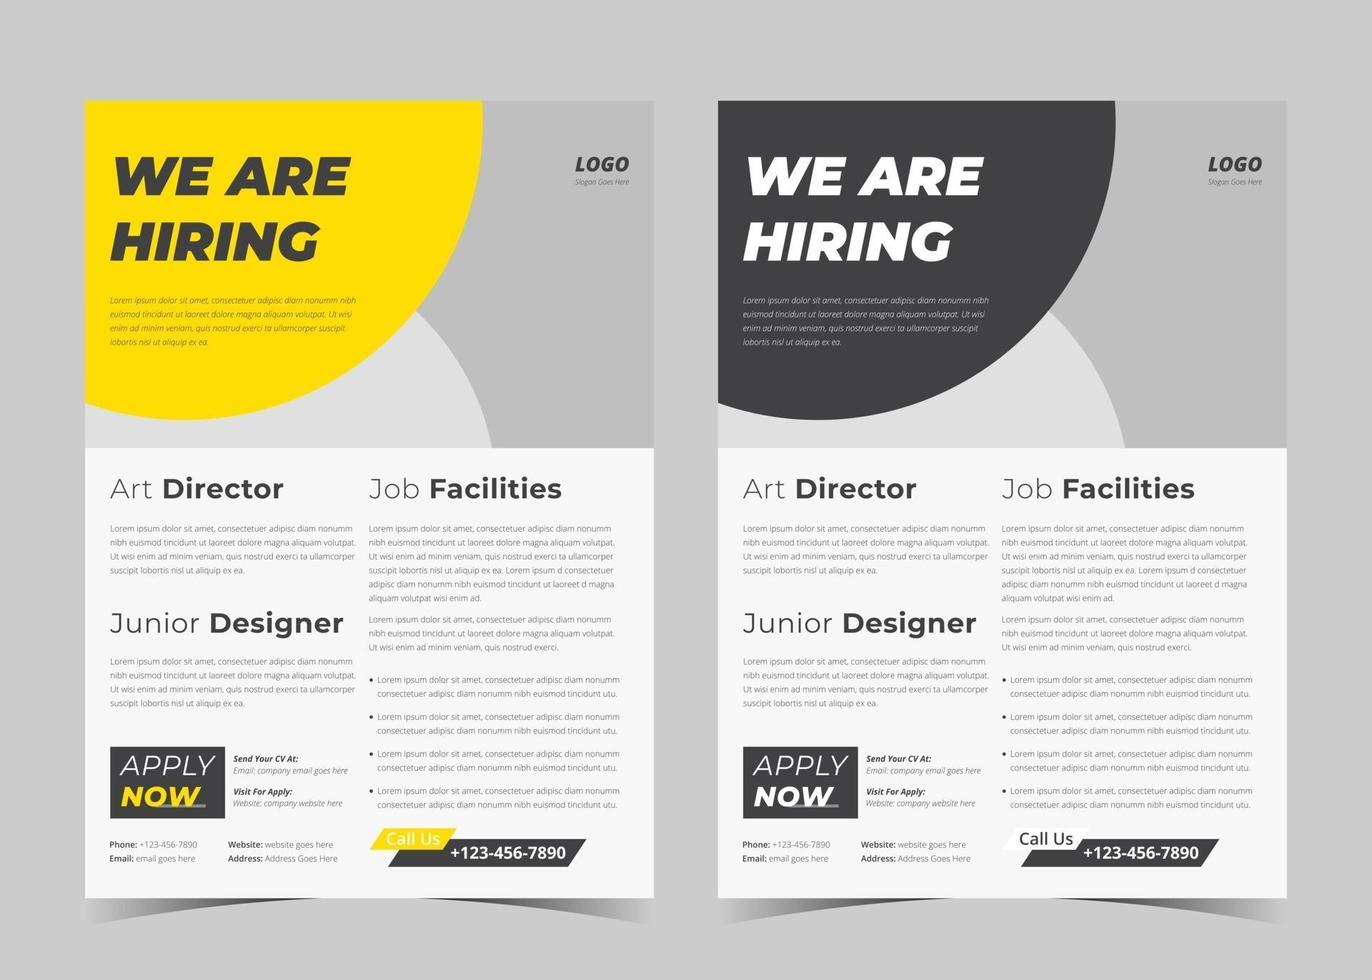 We are hiring flyer design. We are hiring poster template. Job vacancy leaflet flyer template design vector